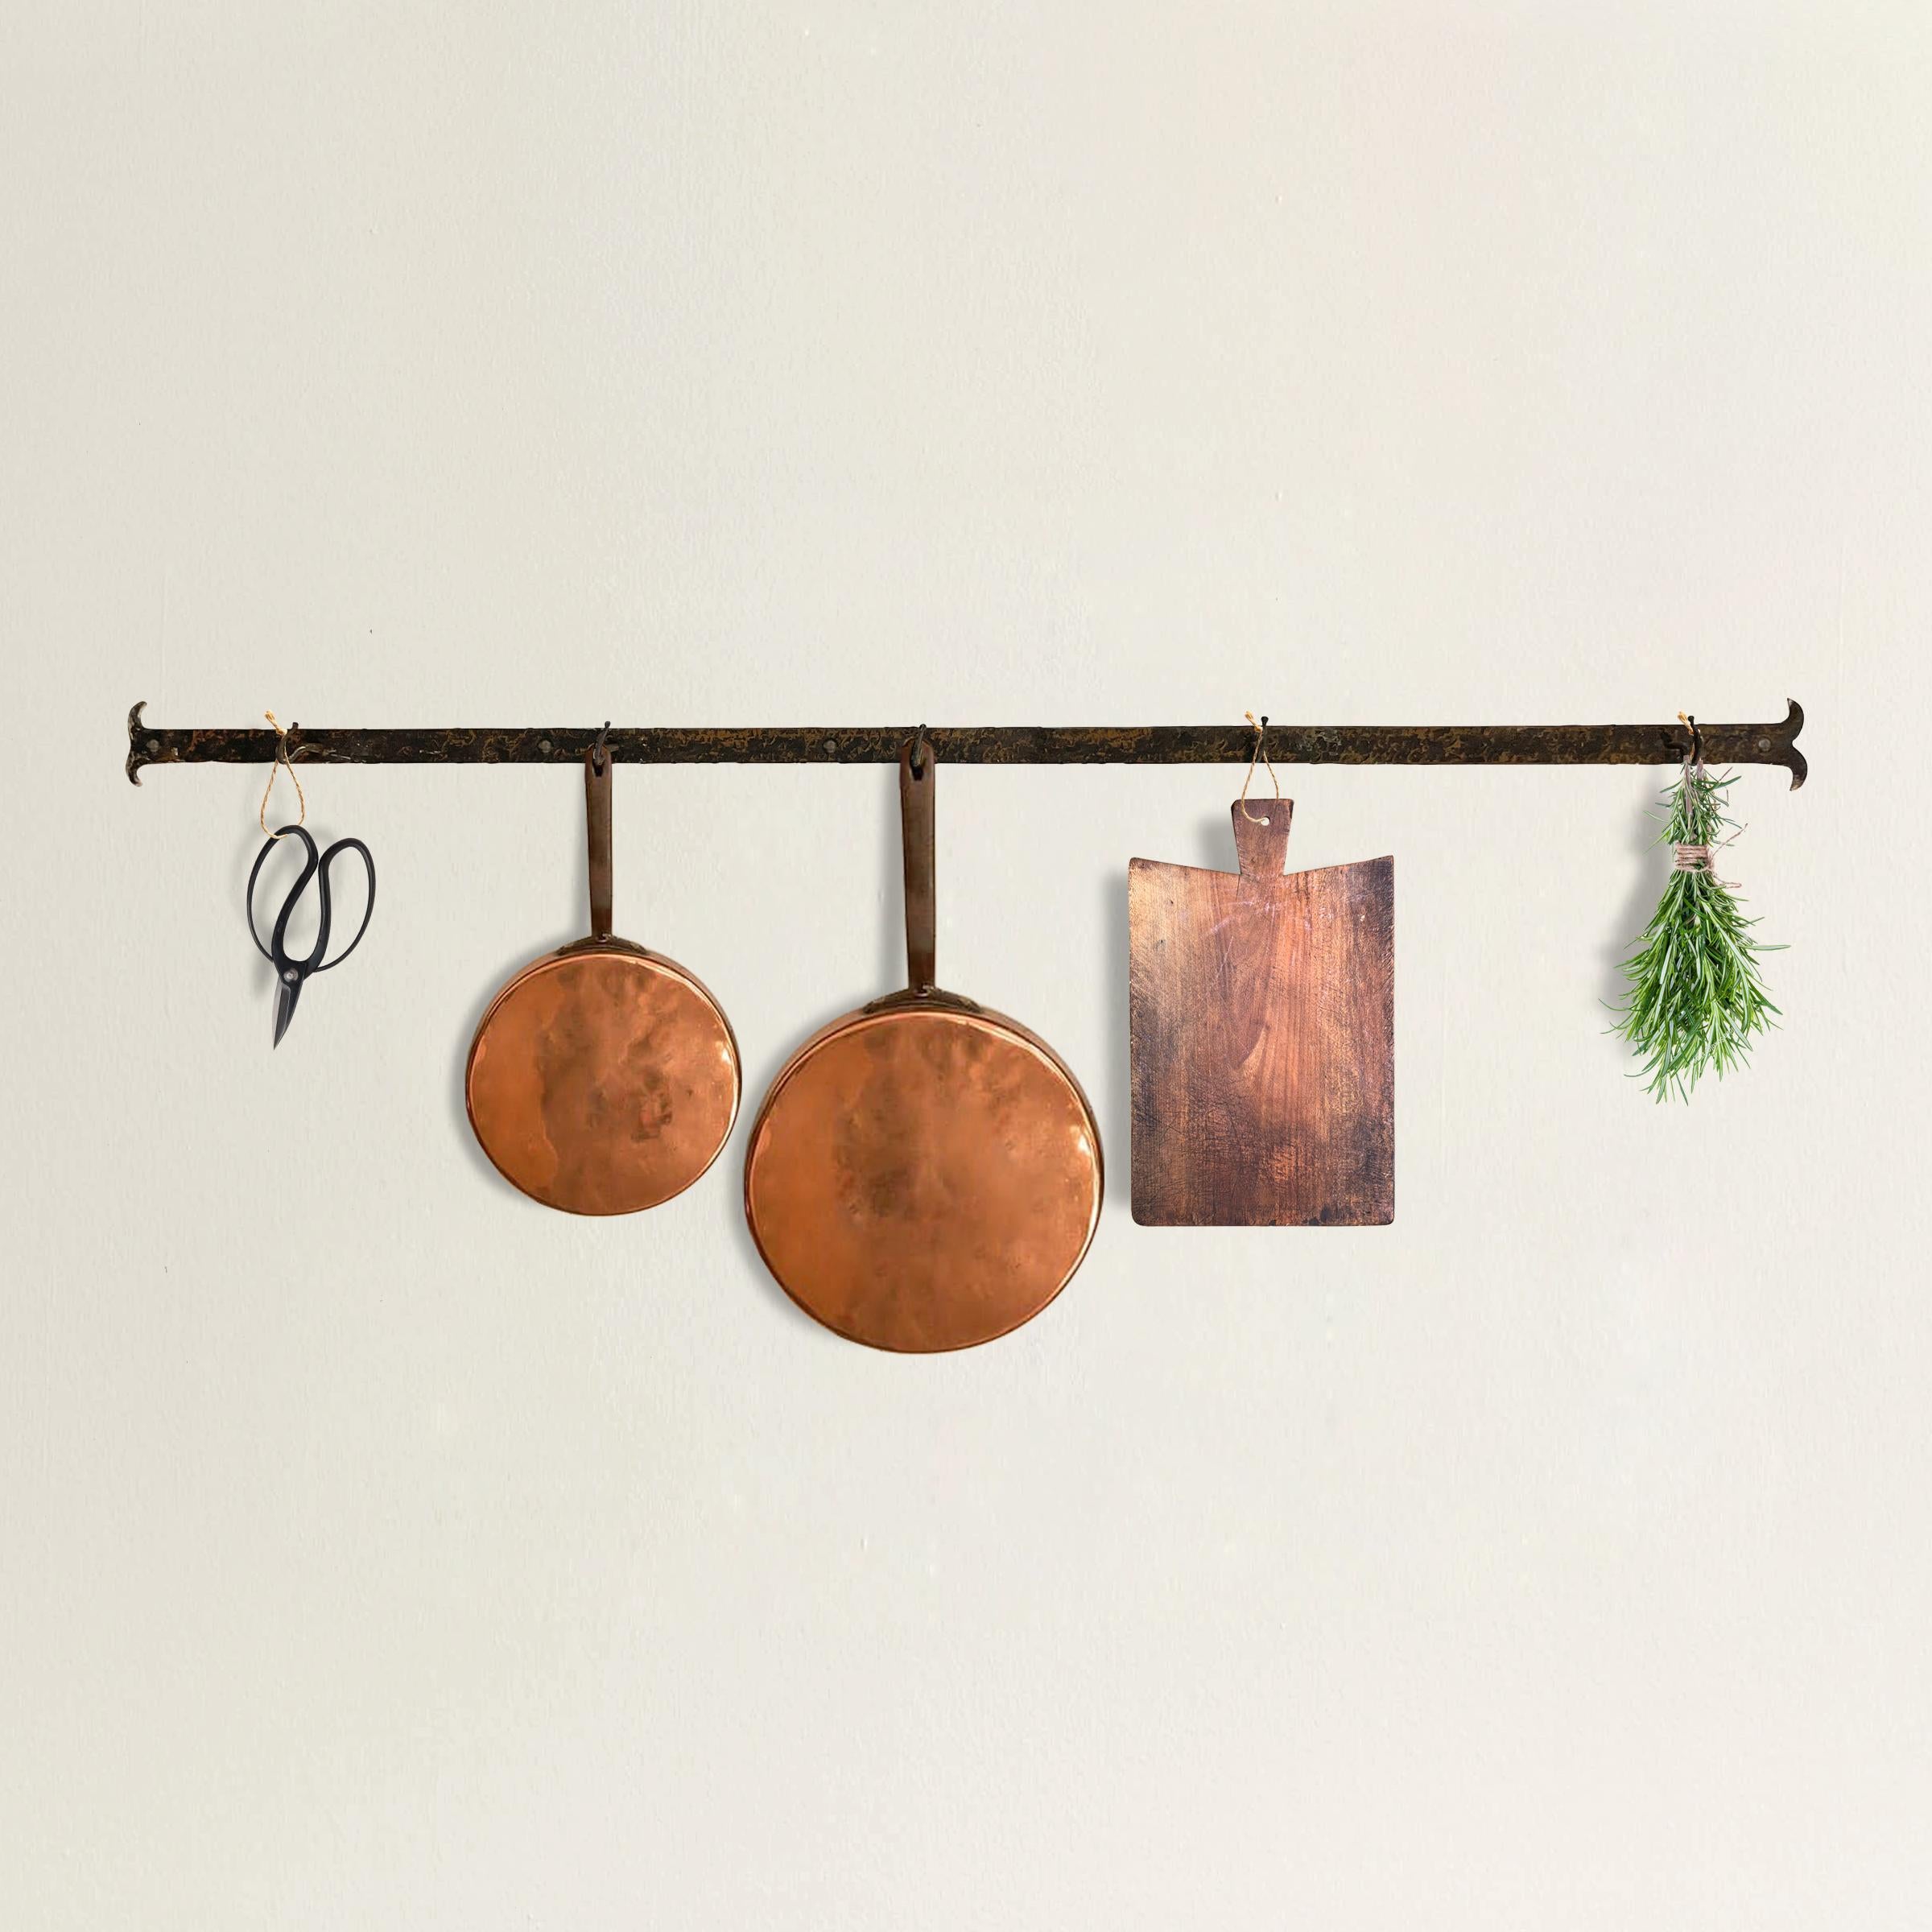 A simple yet refined early 20th century French wrought-iron wall-mounted pot rack with five hooks. Perfect for pouting above your stove to keep pots, lids, cutting boards, or any myriad things at your finger tips in the kitchen.